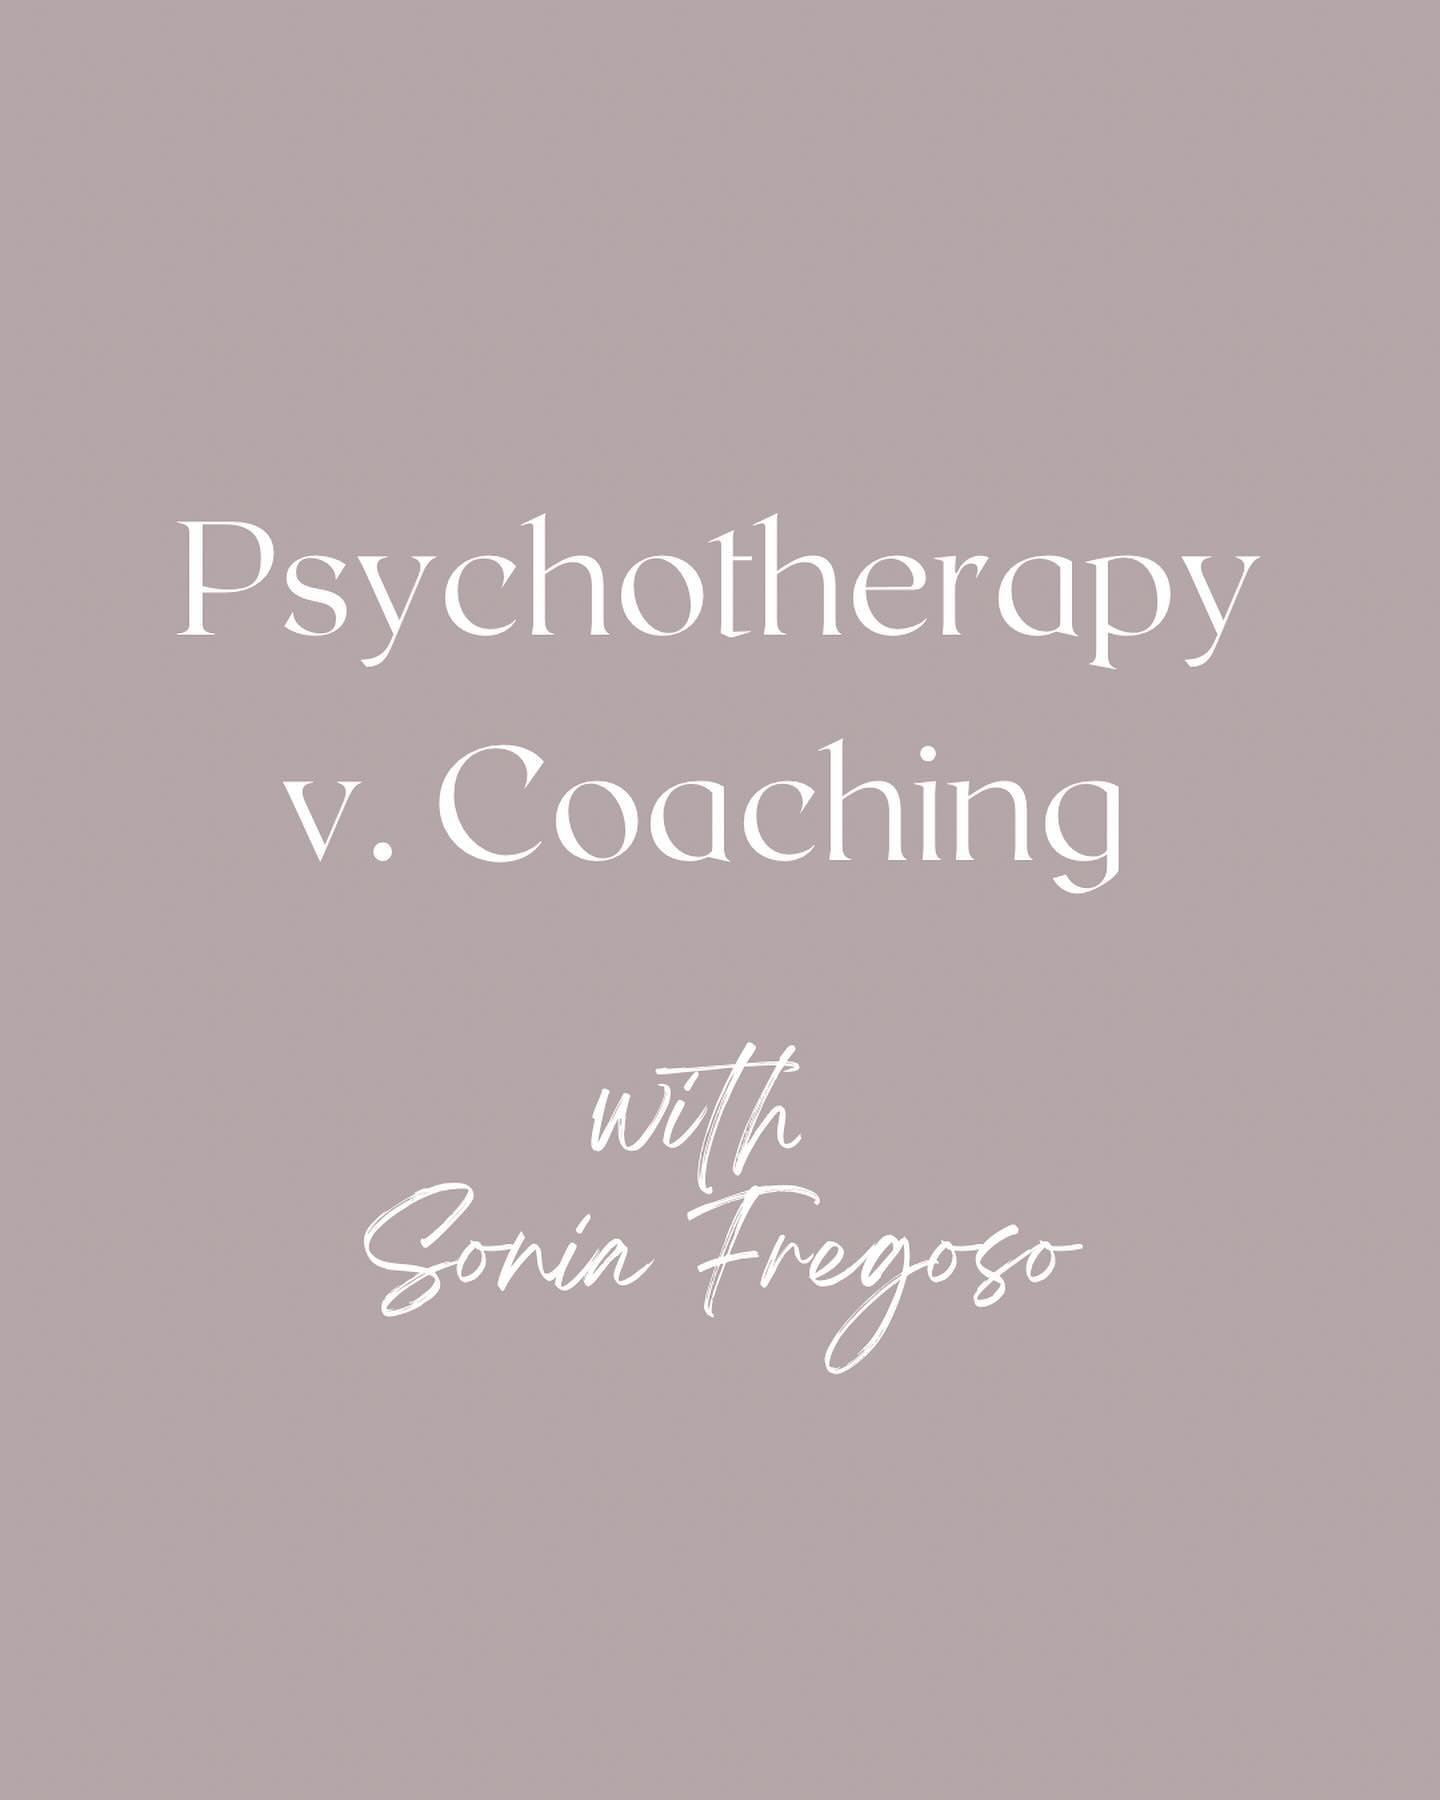 Psychotherapy v. Coaching with Sonia Fregoso&mdash;

The biggest difference between my two offerings are who I can serve and for how long.

As a psychotherapist, I work under a licensing board, which holds many regulations, including, not being able 